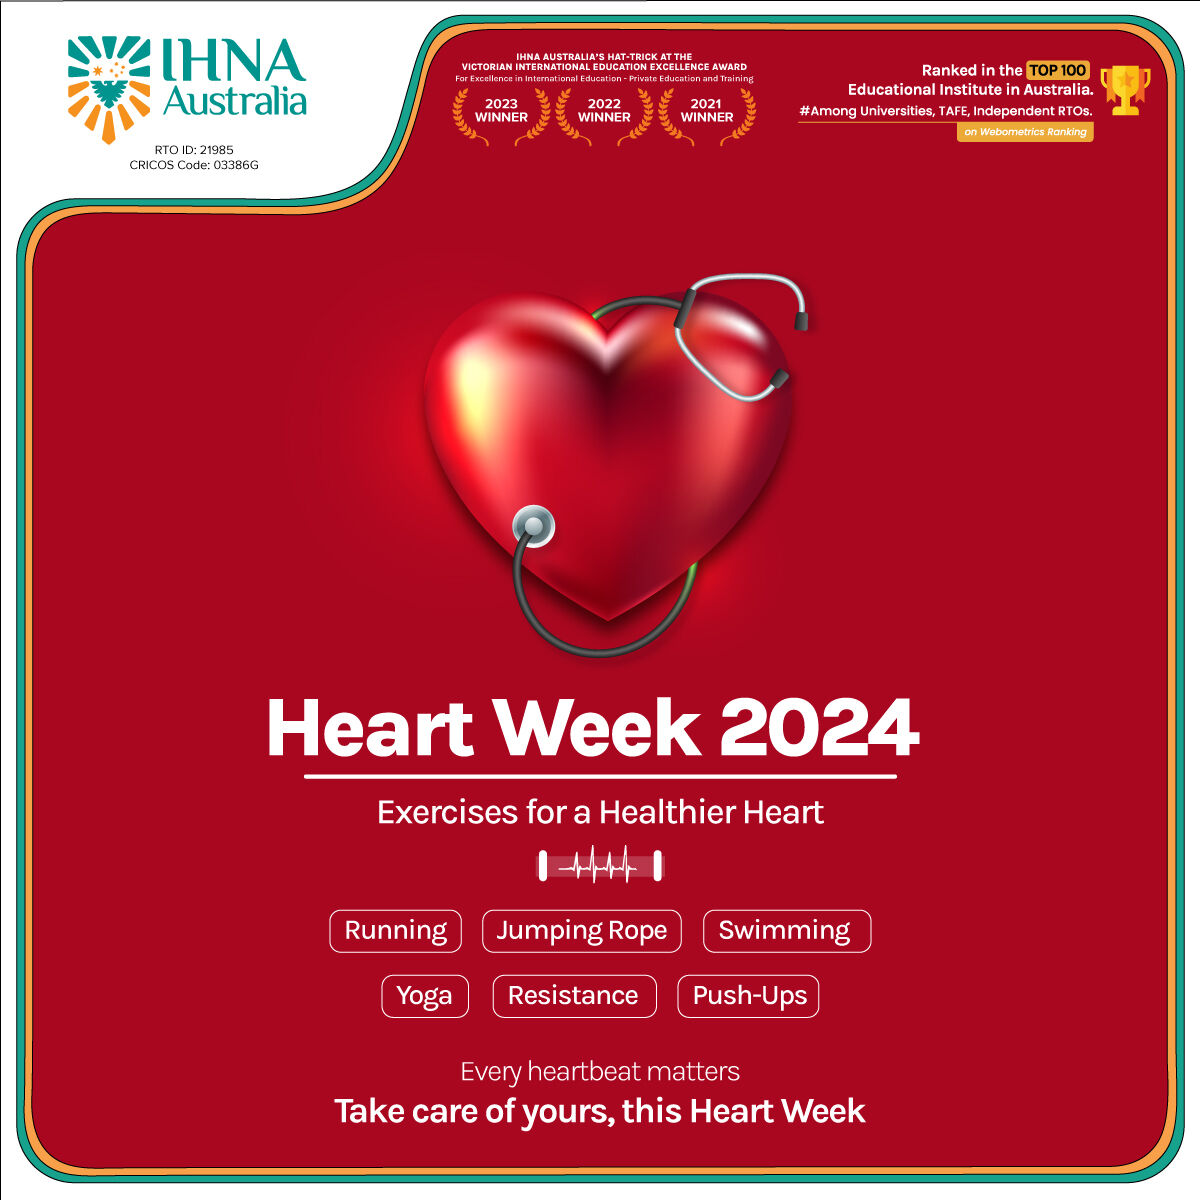 It's Heart Week and we're pumping up the love for cardiovascular health! ❤️ Join us in promoting heart-healthy habits and spreading the message of wellness.
 
#IHNA #IHNAAustralia #HeartWeek #HealthyHeart #WellnessJourney #WellnessCommunity #HealthyLiving